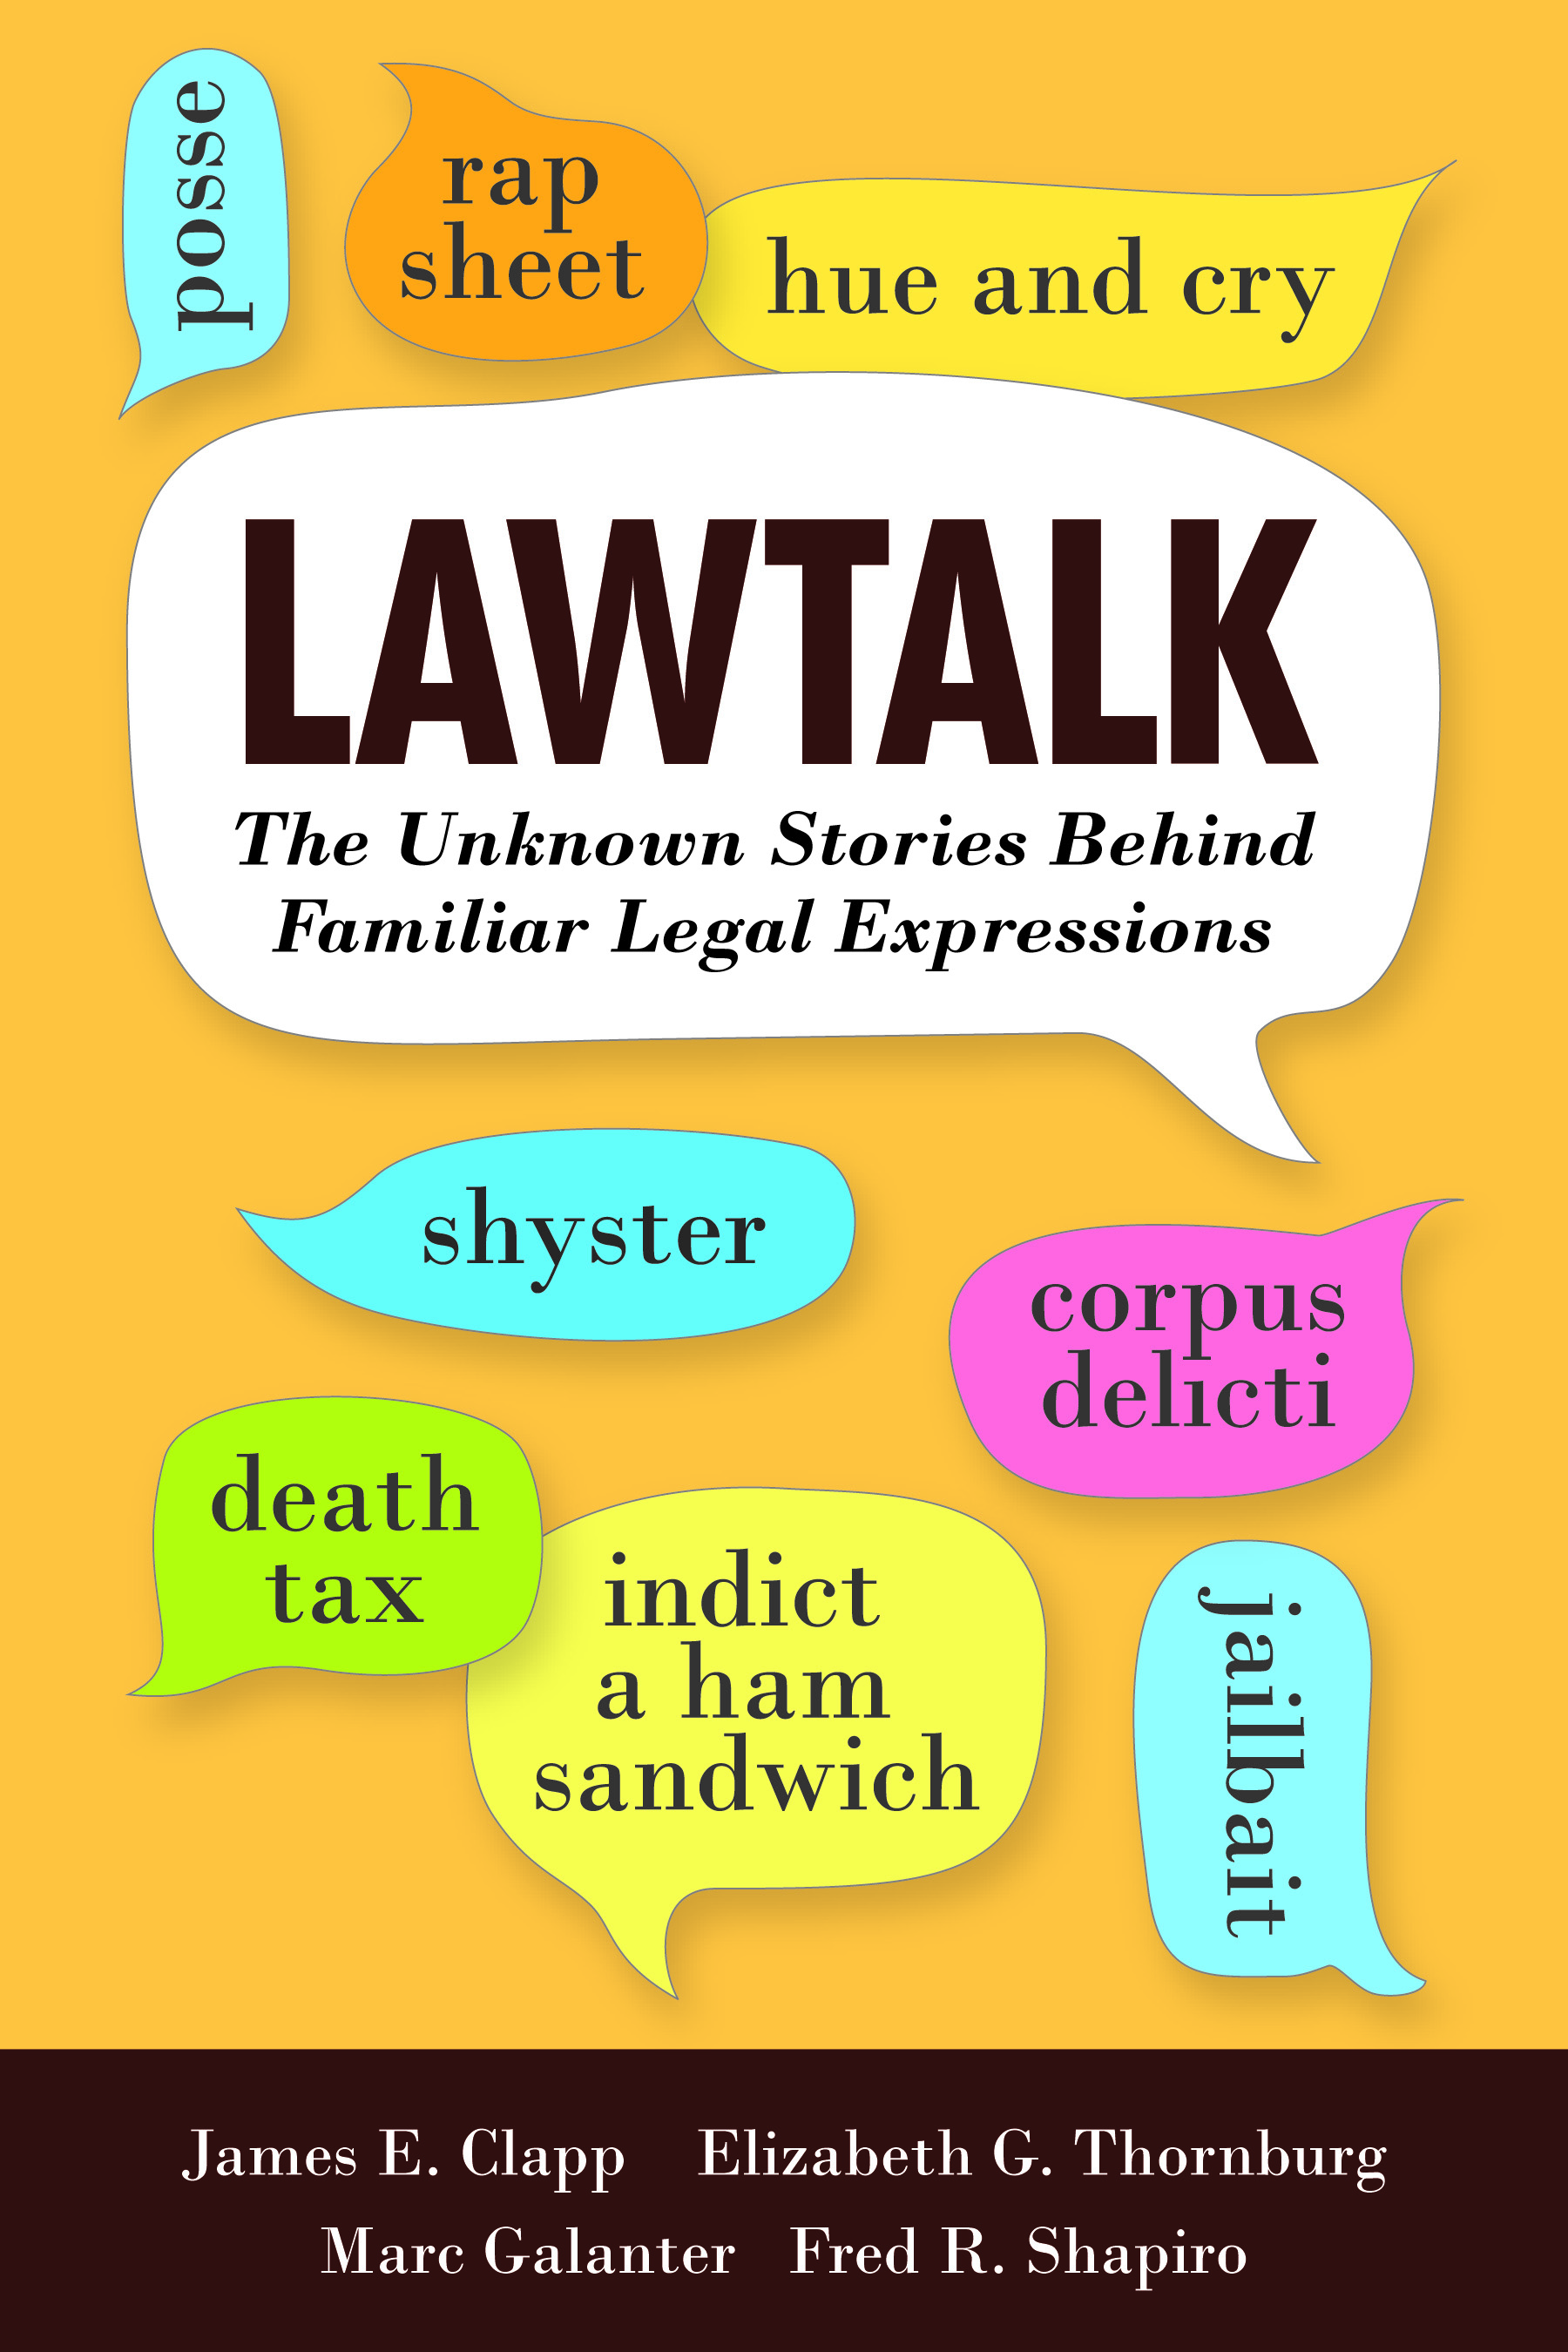 Lawtalk book cover